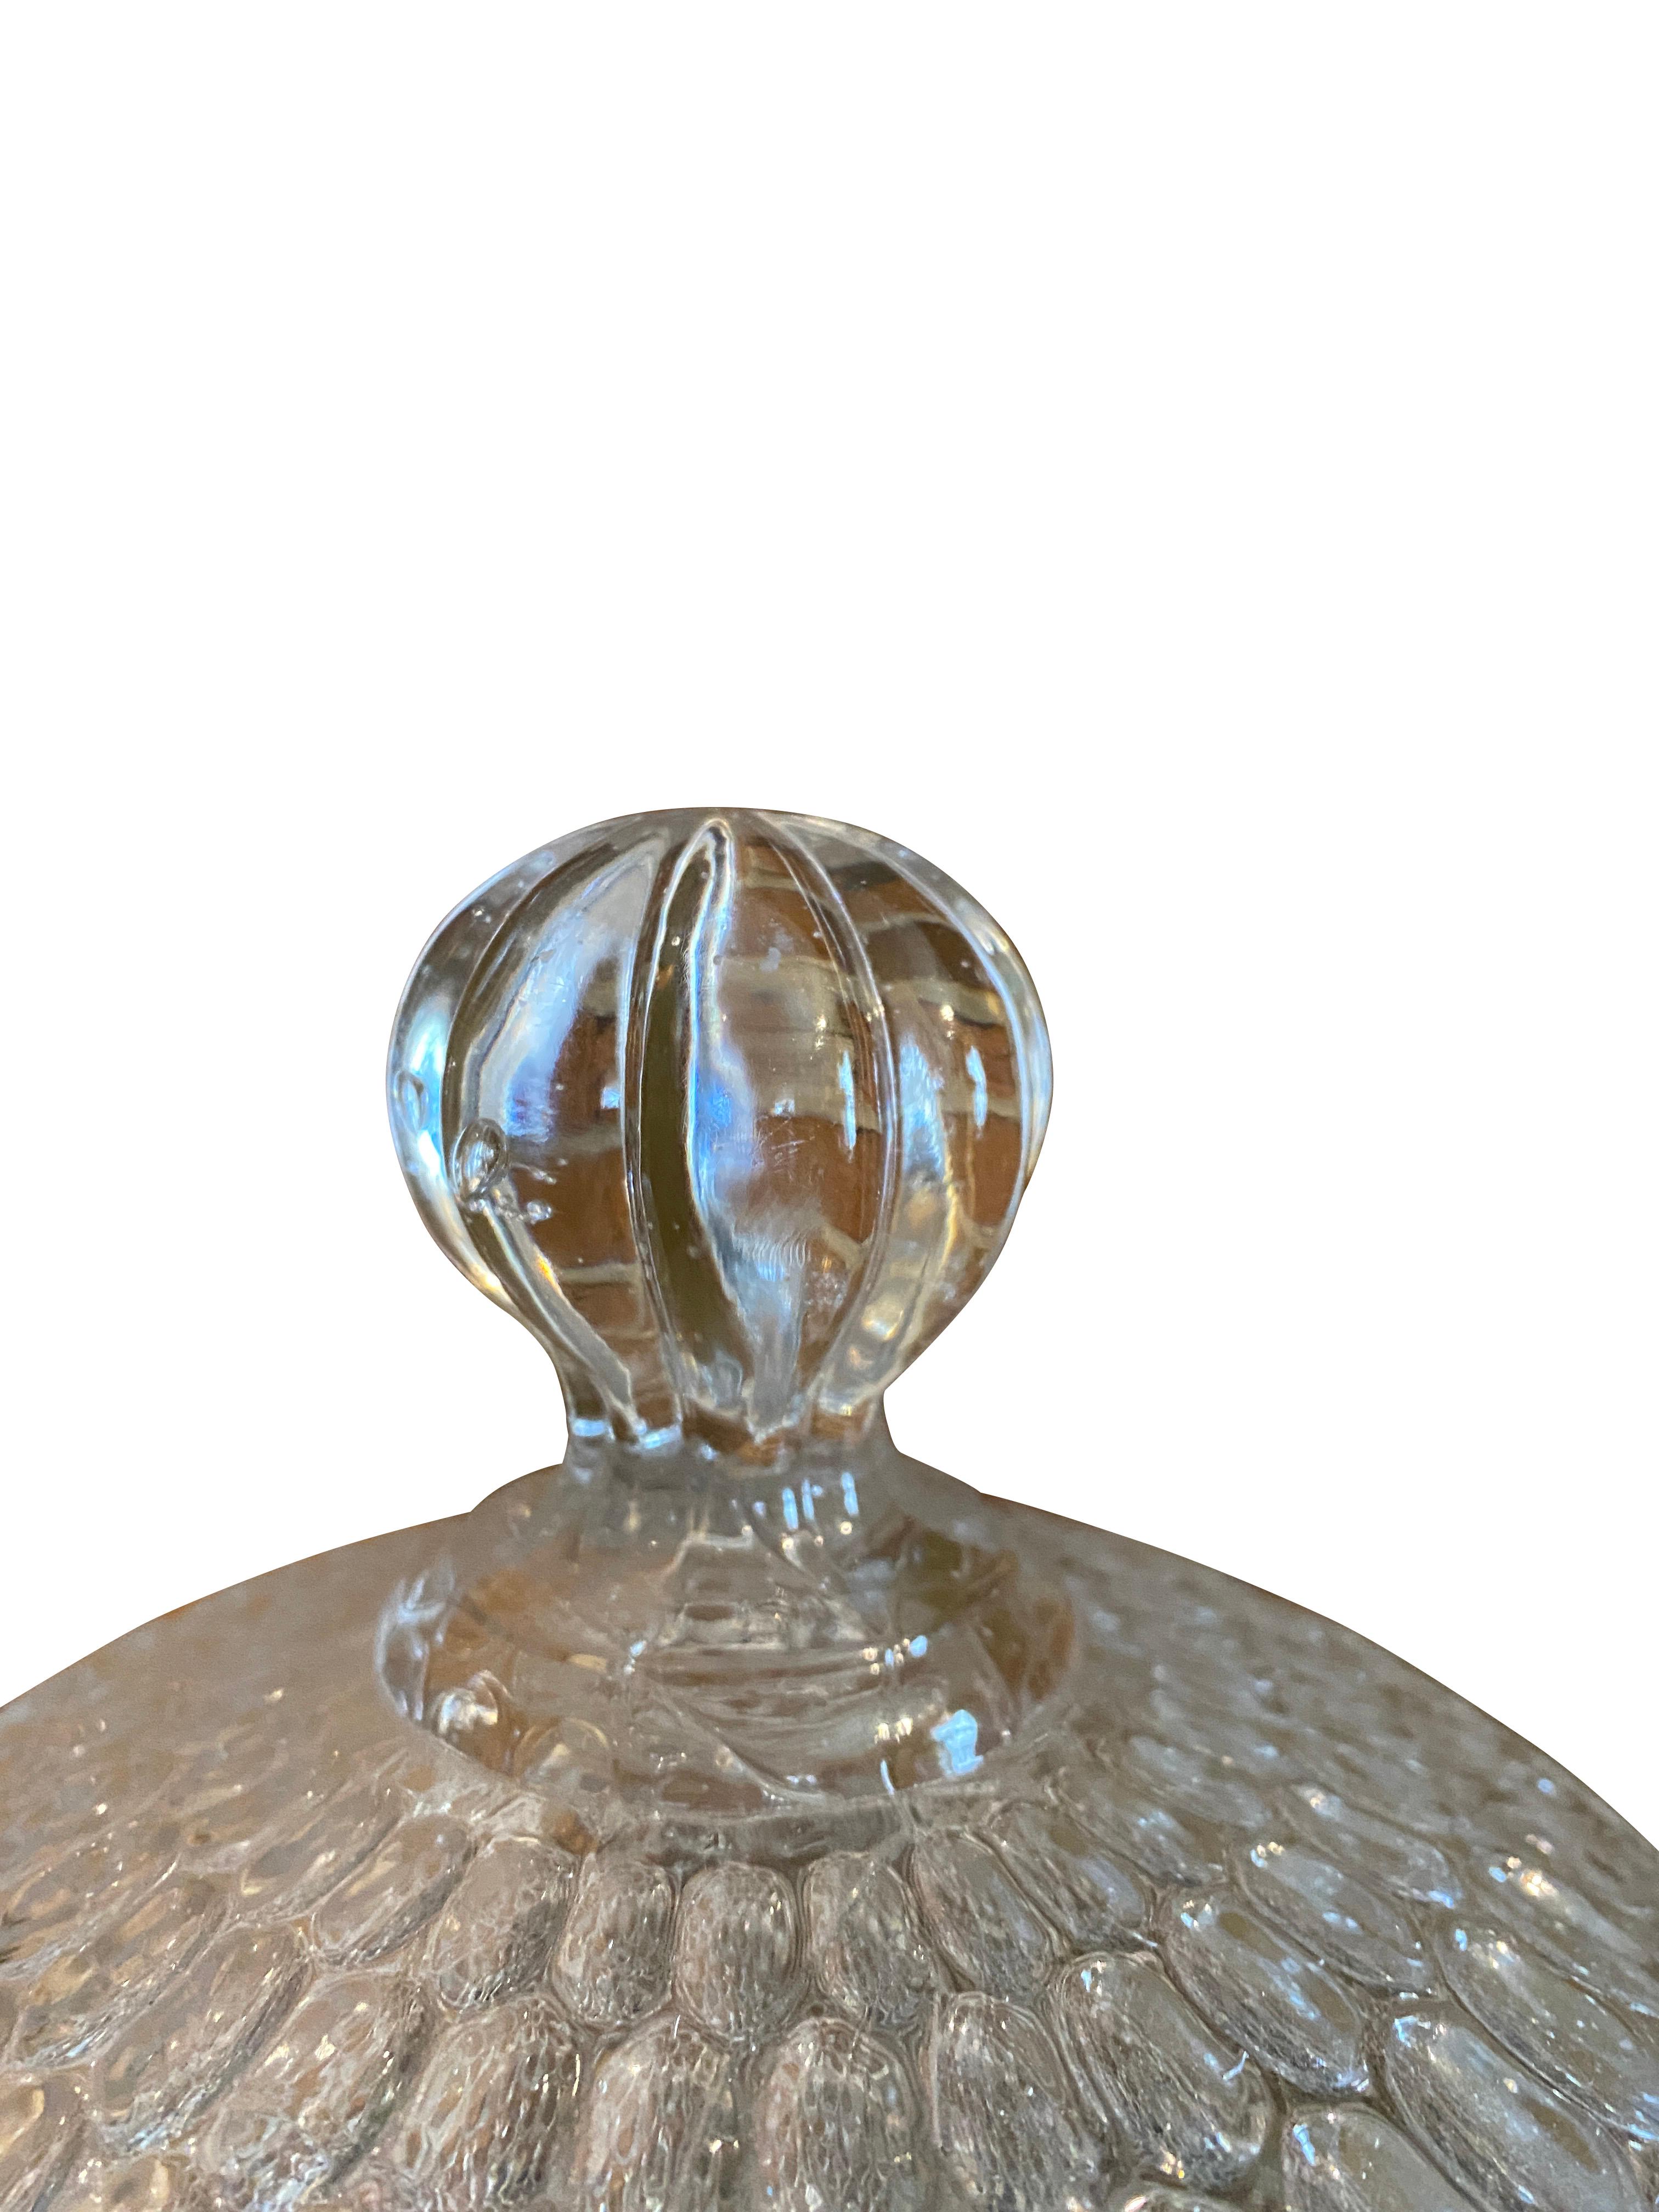 American Argus or Thumbprint Glass Compote by Bakewell & Pears & Company